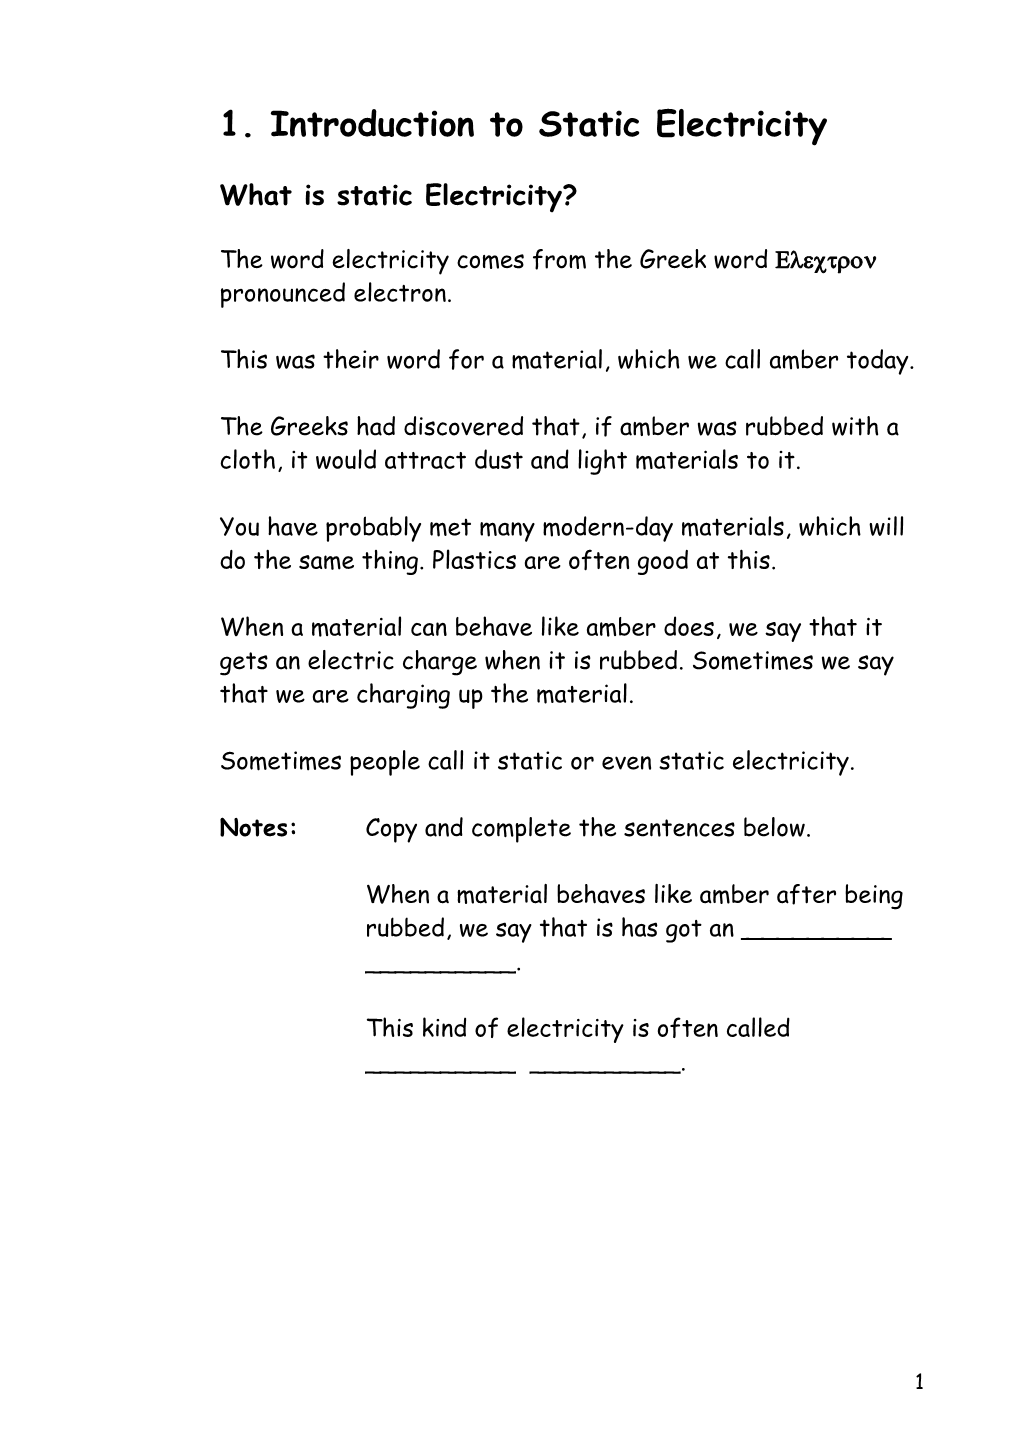 1. Introduction to Static Electricity